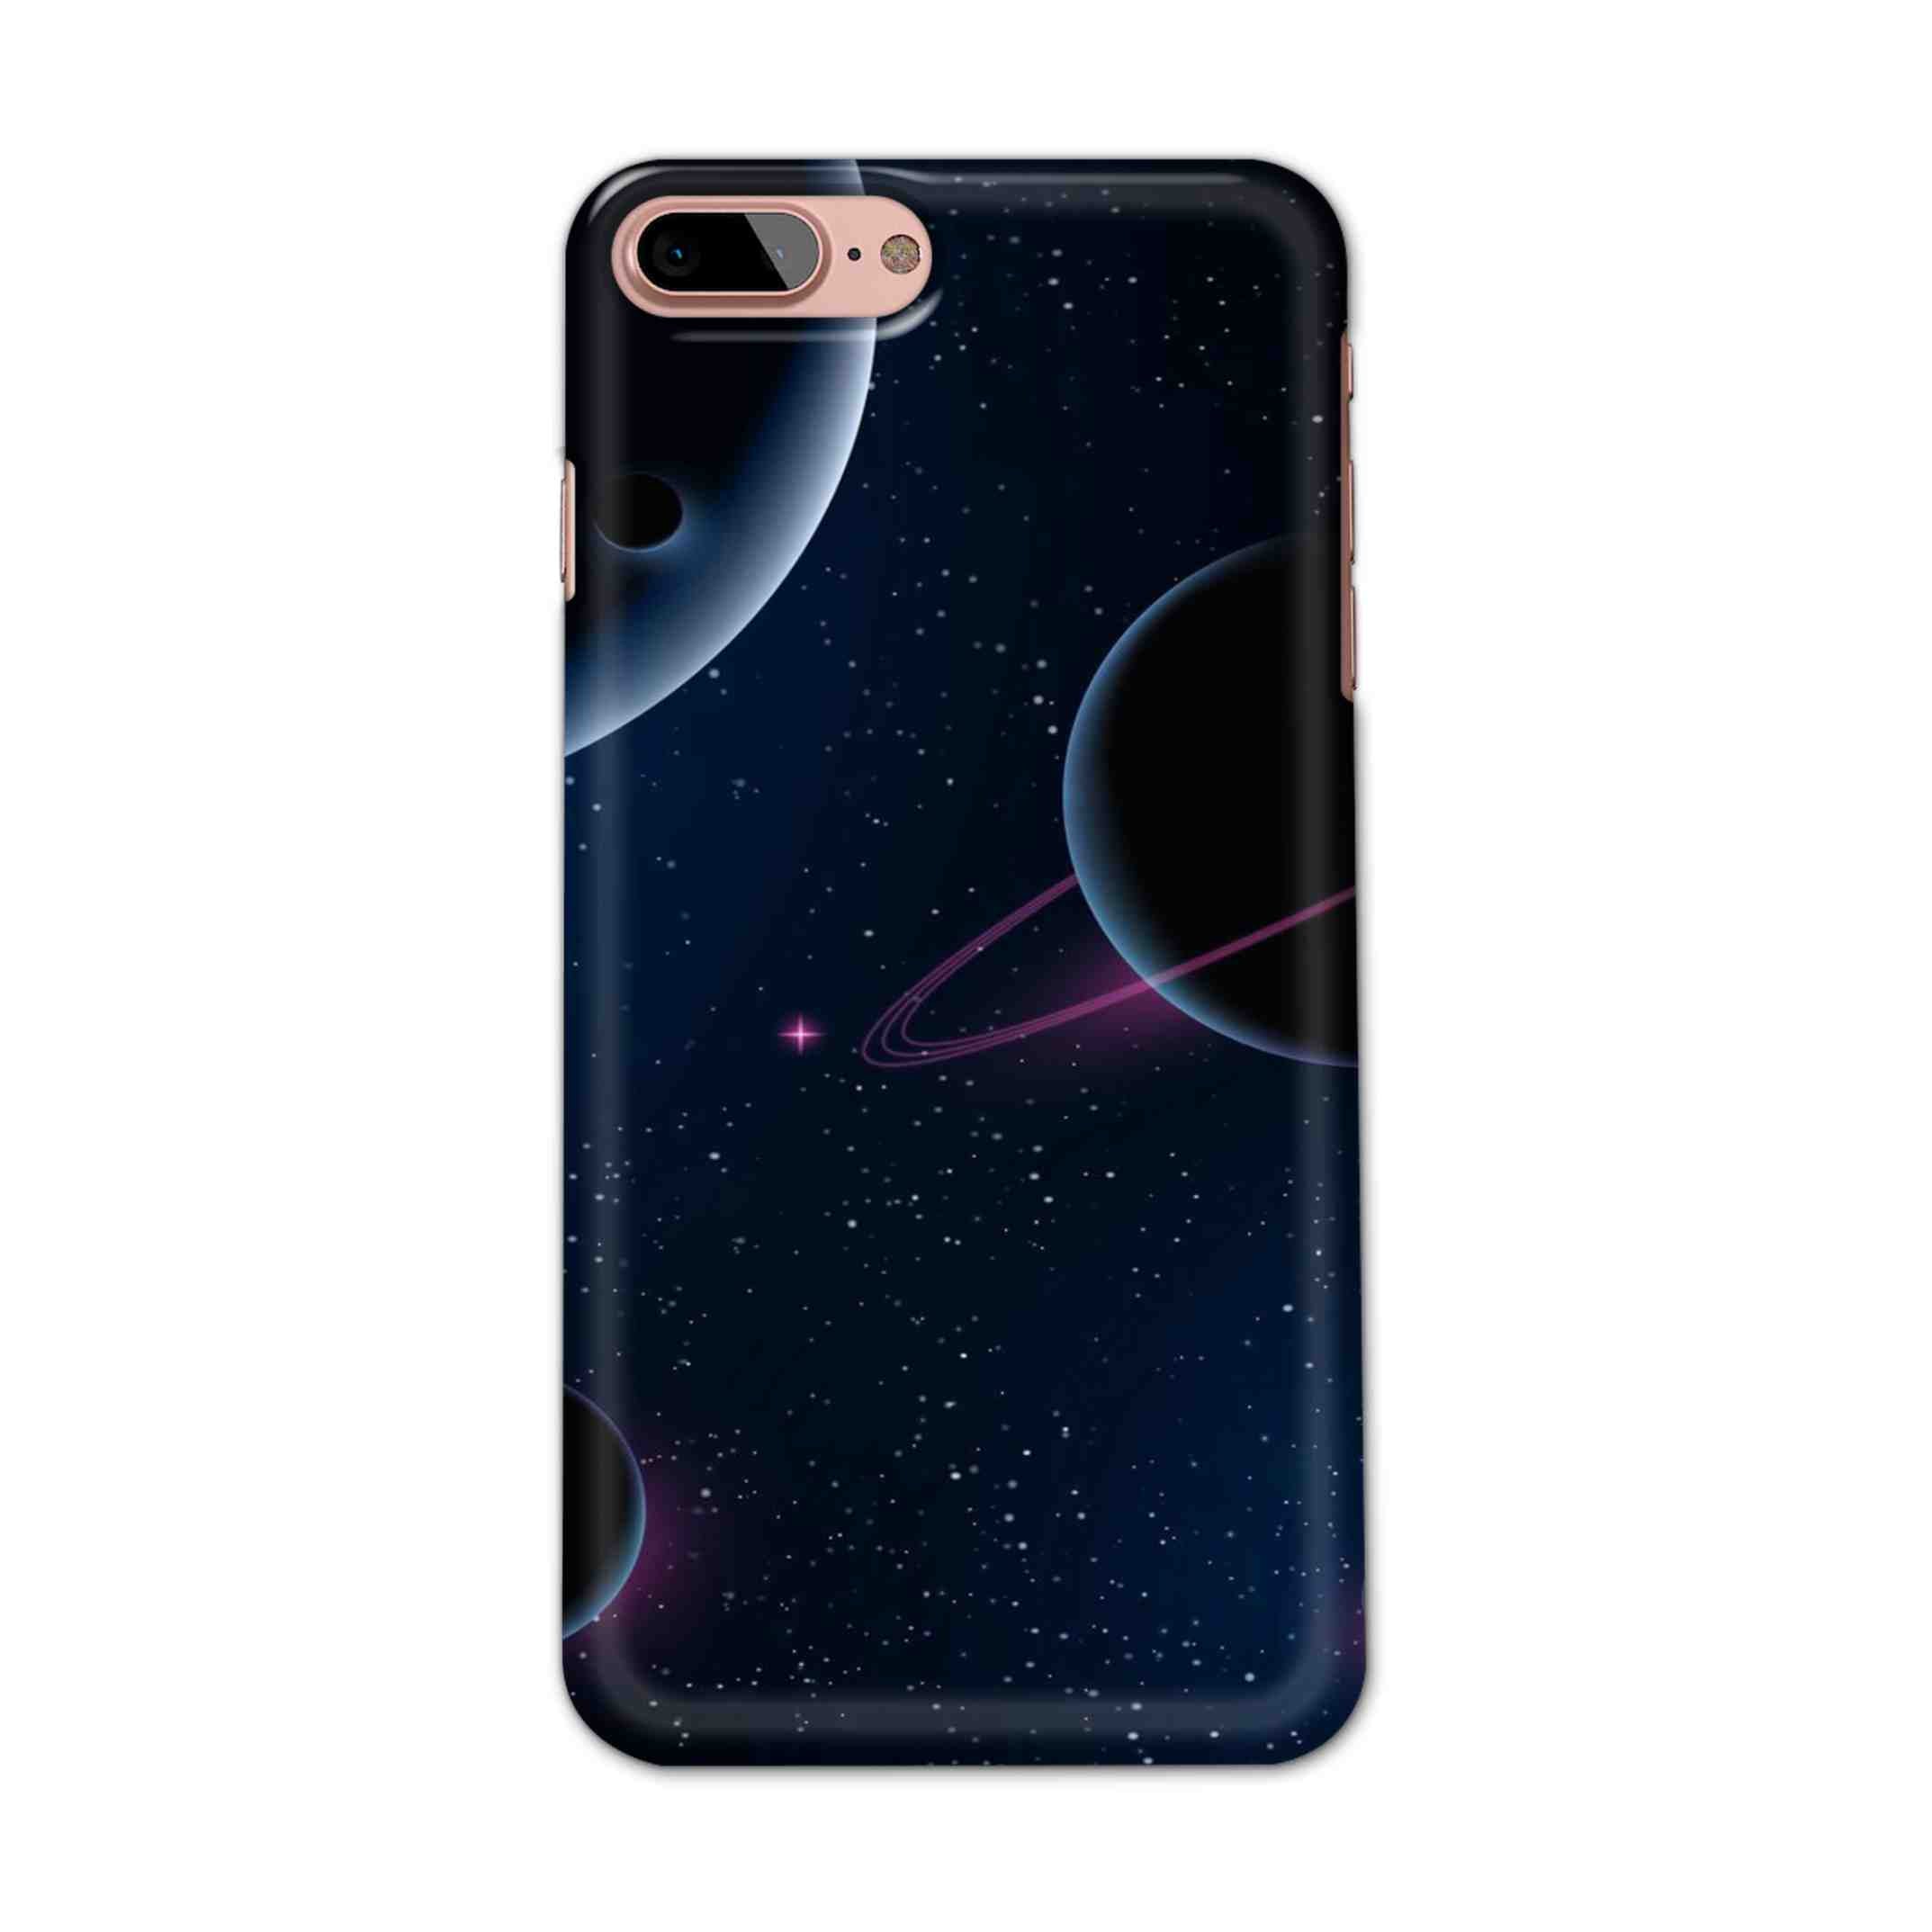 Buy Night Space Hard Back Mobile Phone Case/Cover For iPhone 7 Plus / 8 Plus Online